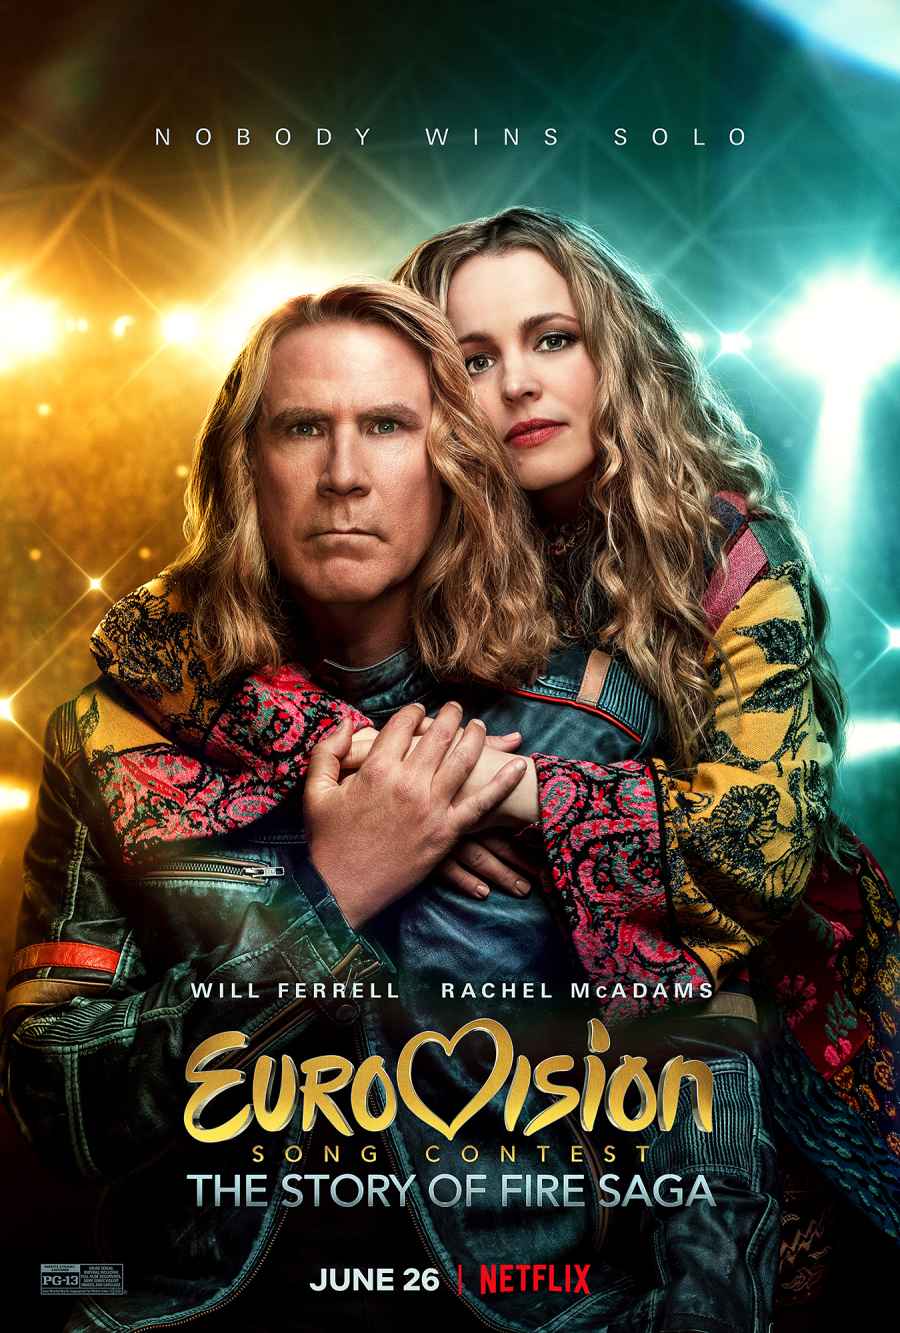 Will Ferrell and Rachel McAdams in Eurovision Song Contest: The Story of Fire Saga What to Watch This Week While Social Distancing